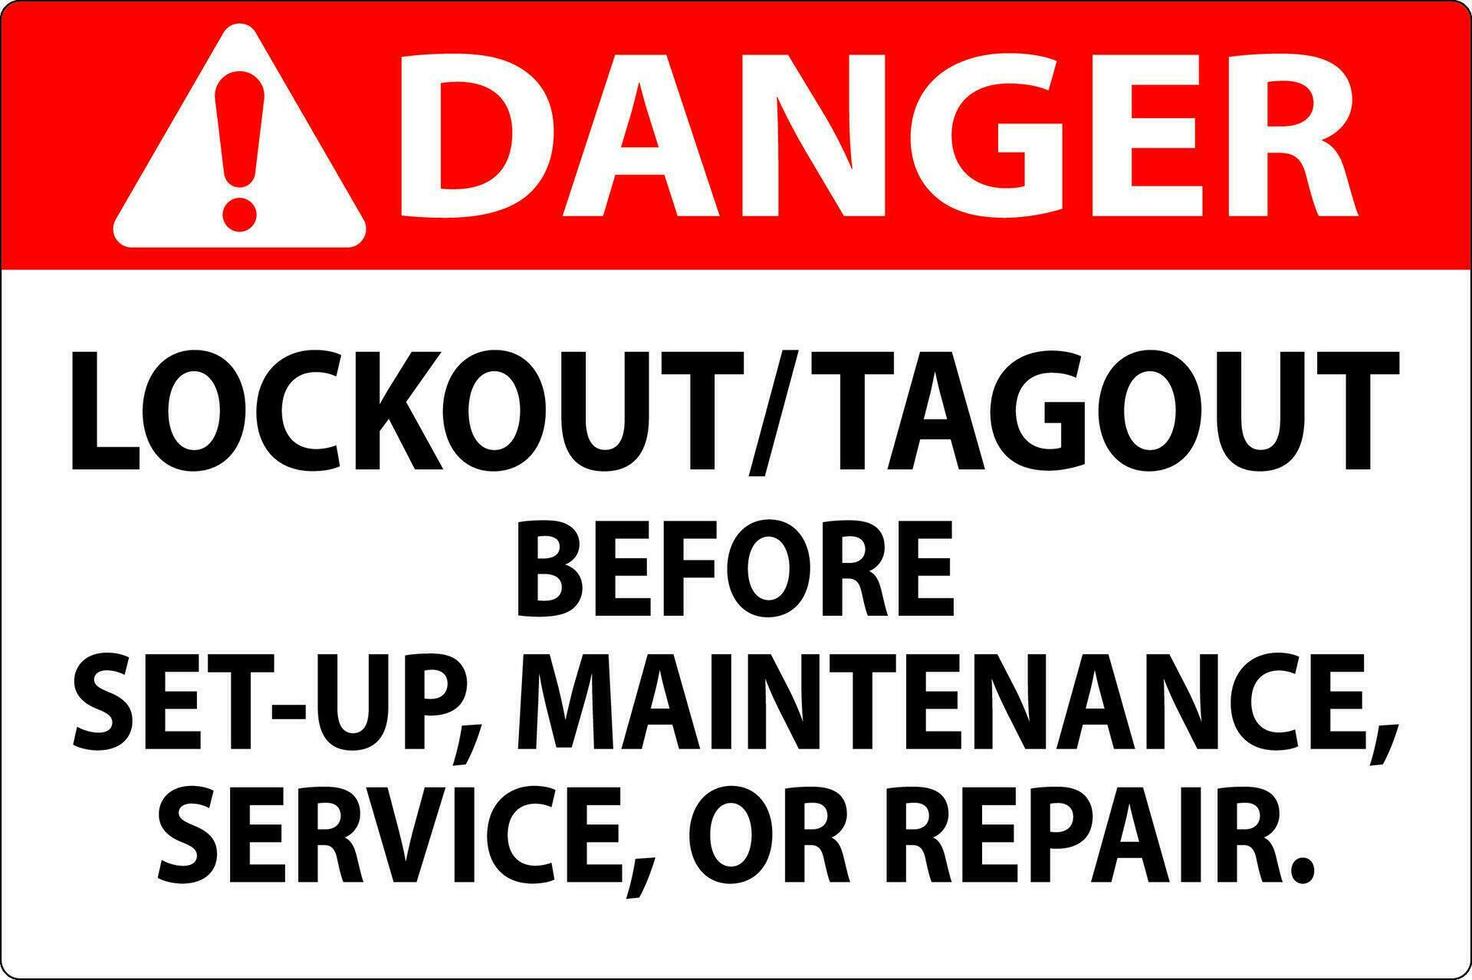 Danger Safety Label Lockout Tagout Before Set-Up, Maintenance, Service Or Repair vector